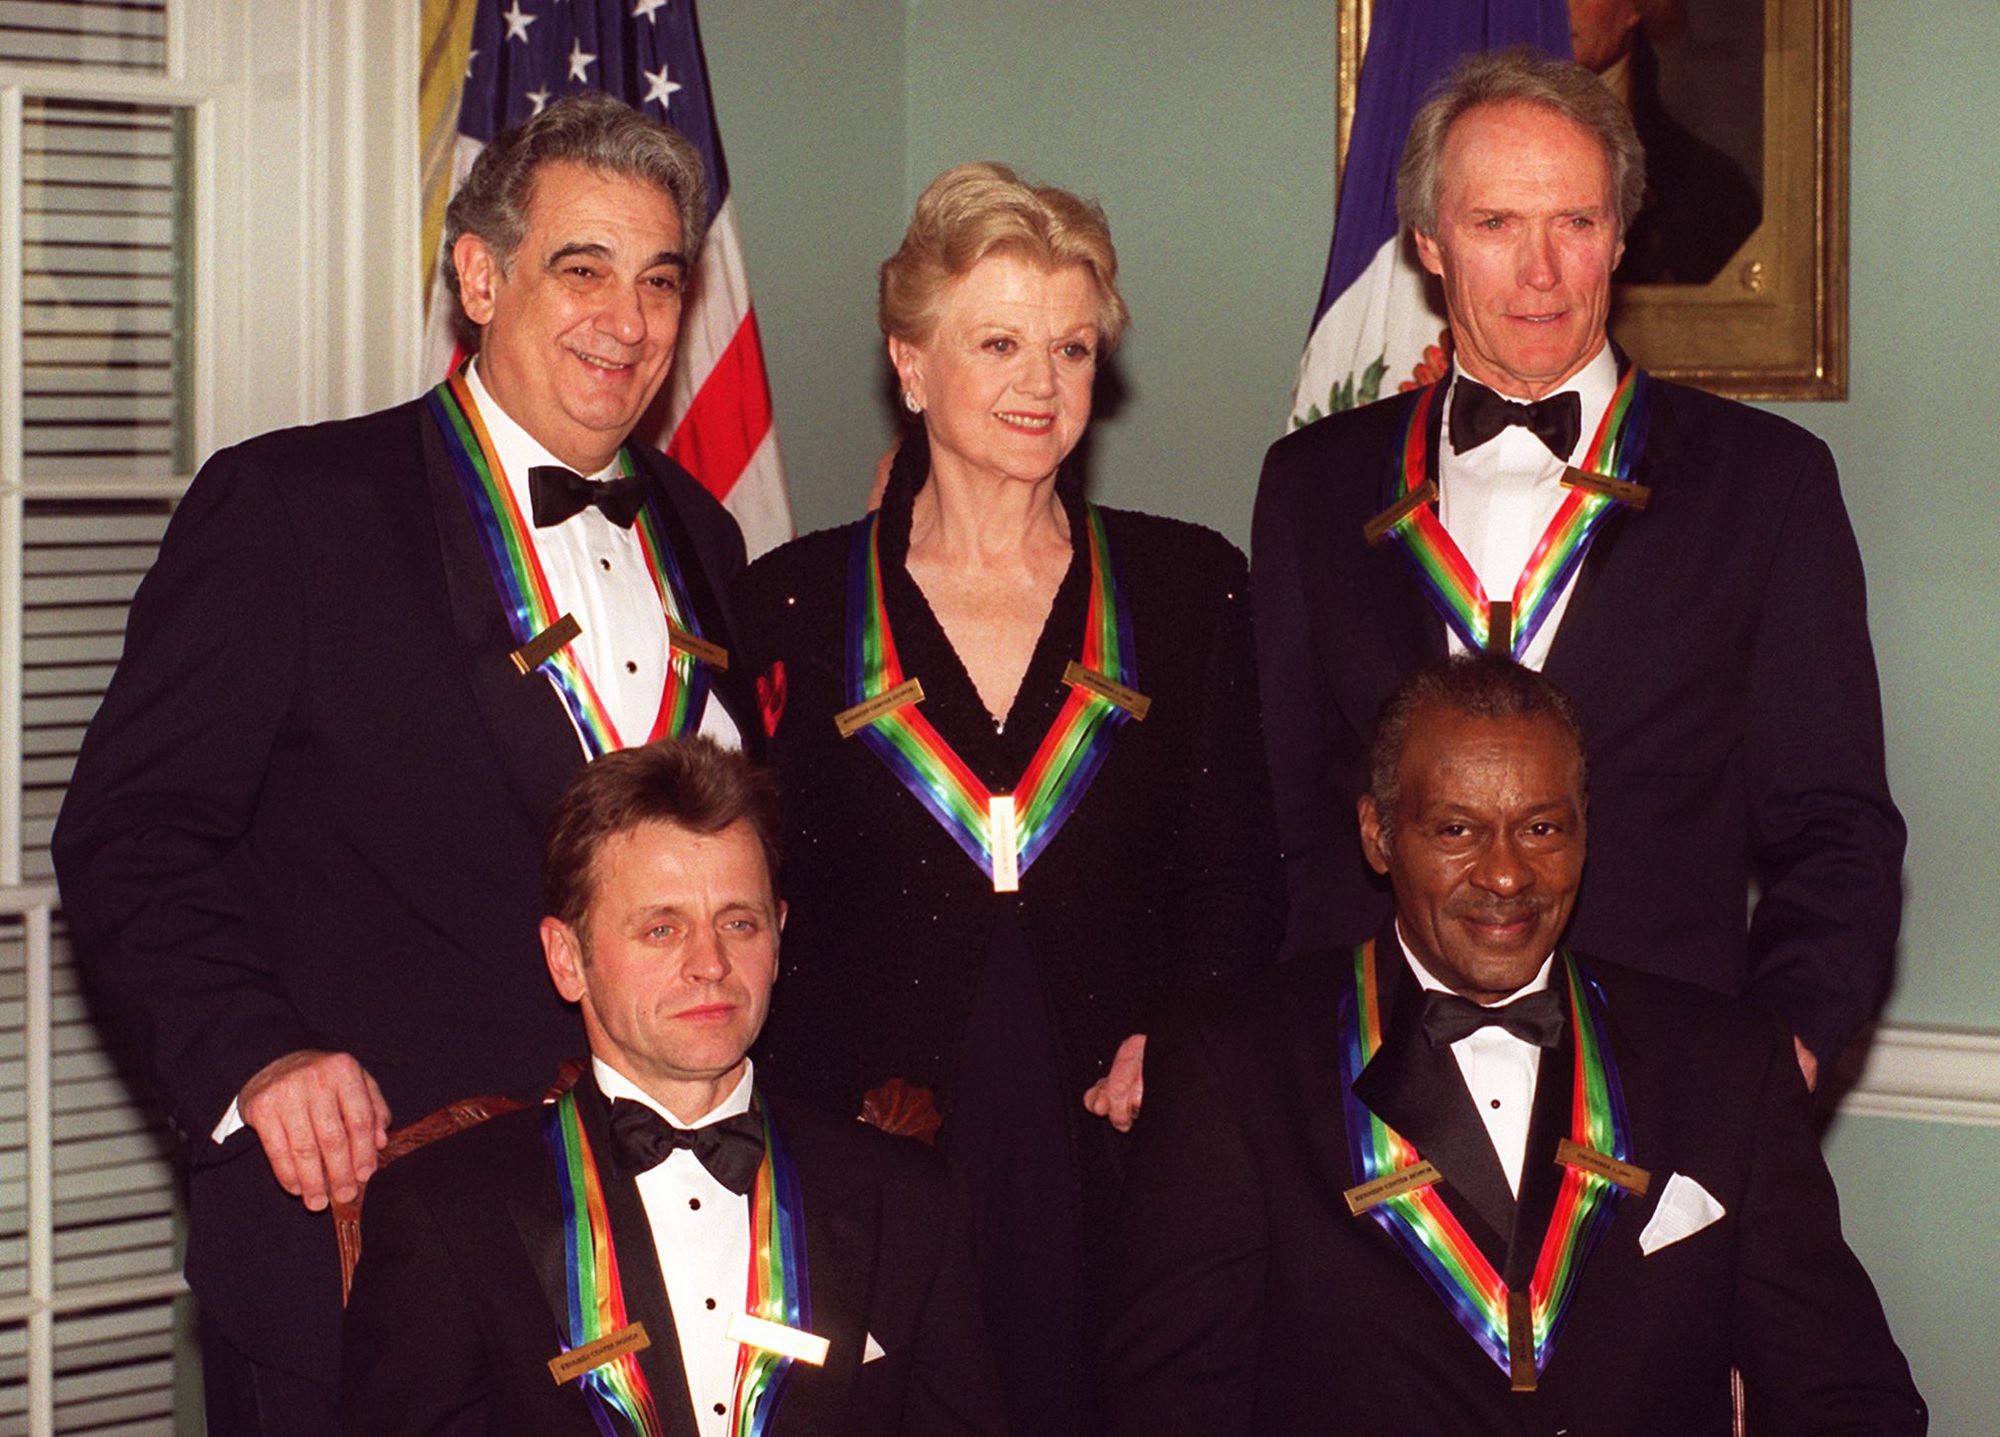 Kennedy Center Honorees Chuck Berry, along with Placido Domingo, Angela Lansbury, Clint Eastwood, and Mikhail Baryshnikov in Washington, D.C., on Dec. 2, 2000.